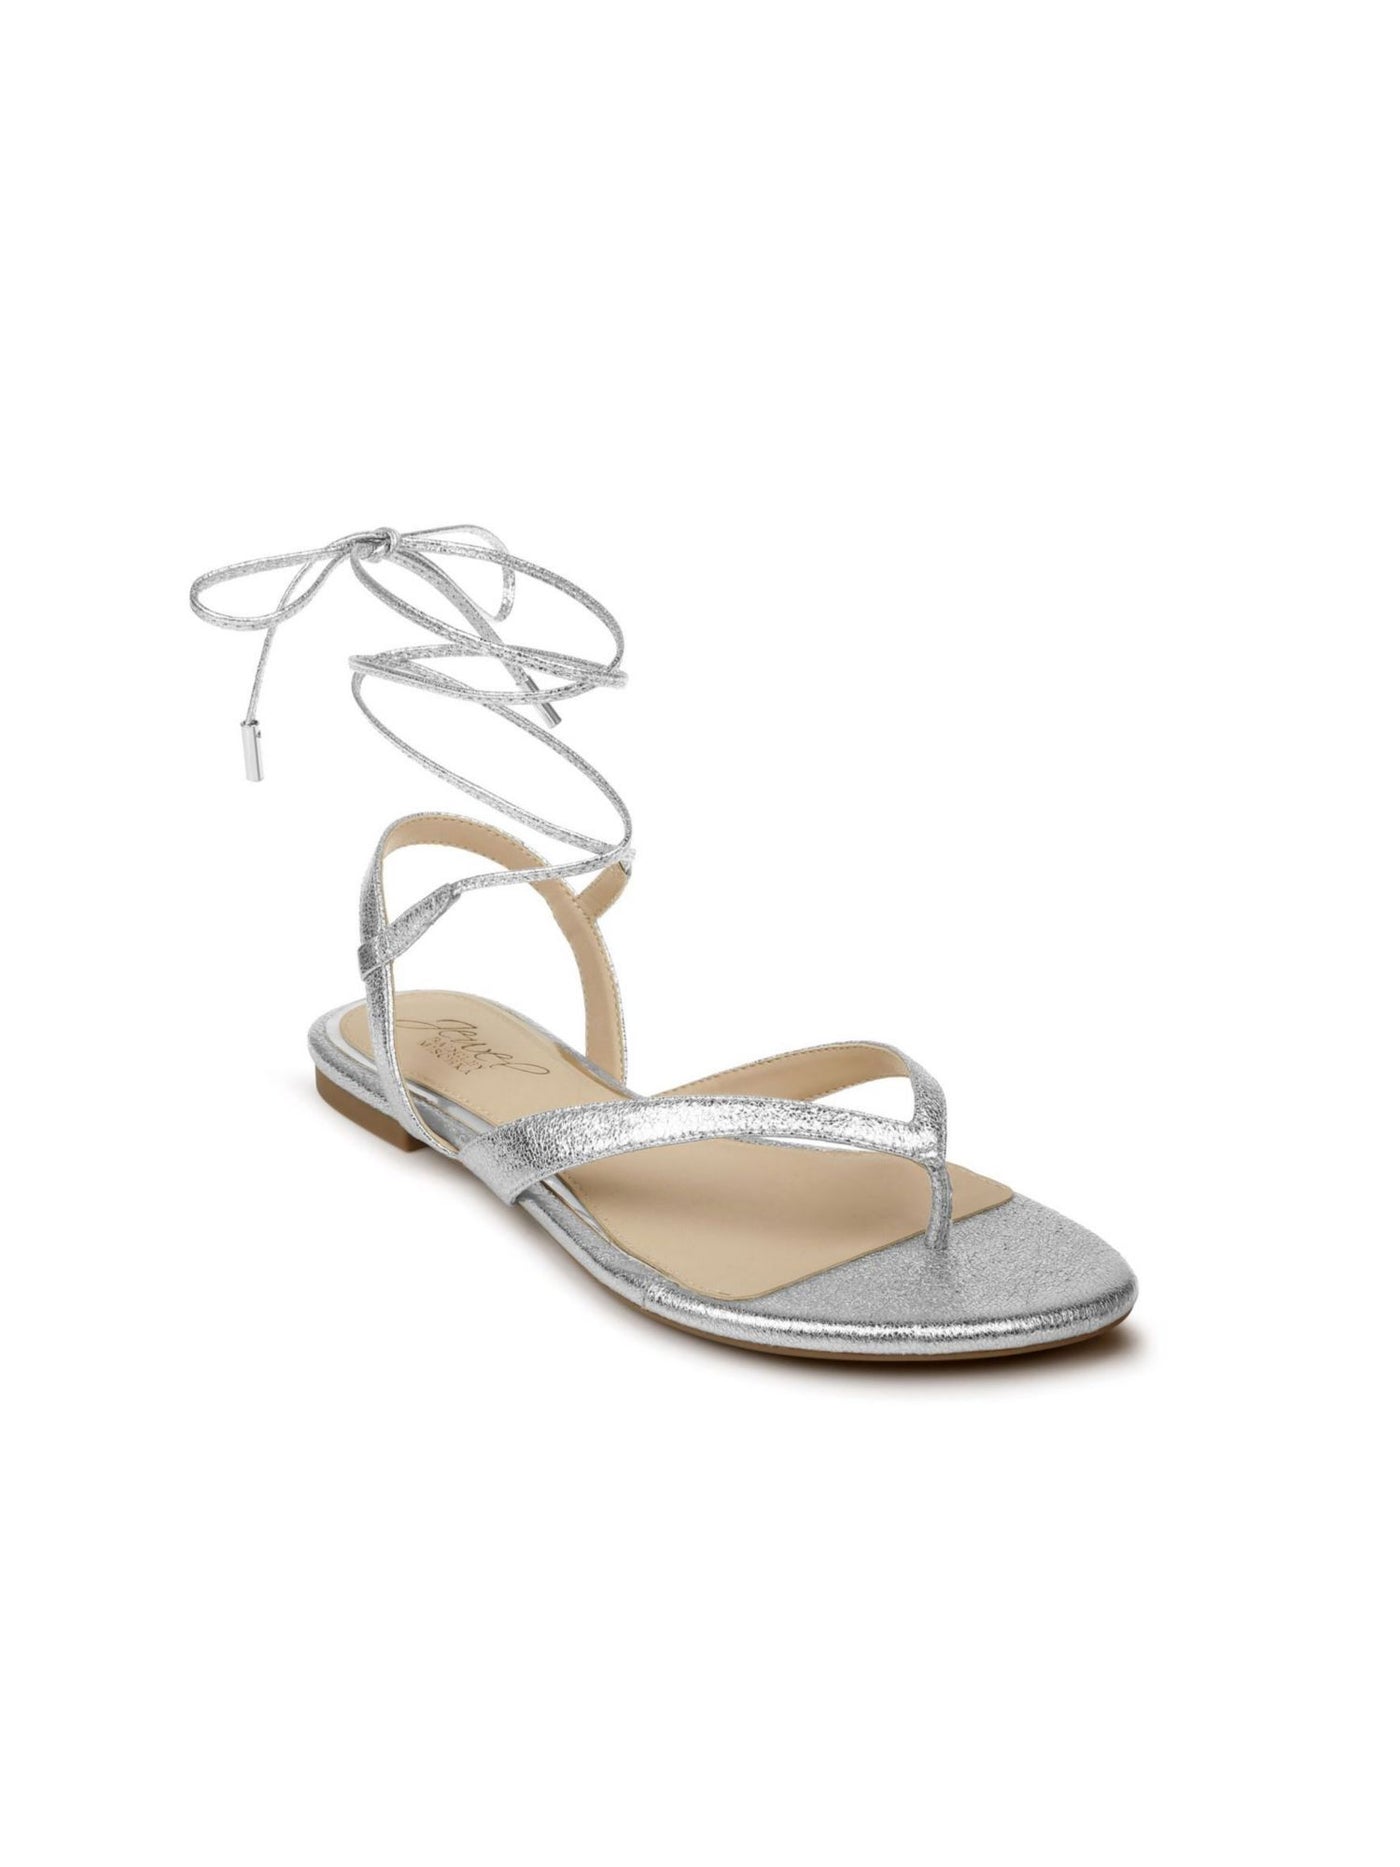 BADGLEY MISCHKA Womens Silver Ankle Strap Padded Nolana Round Toe Lace-Up Dress Thong Sandals 8